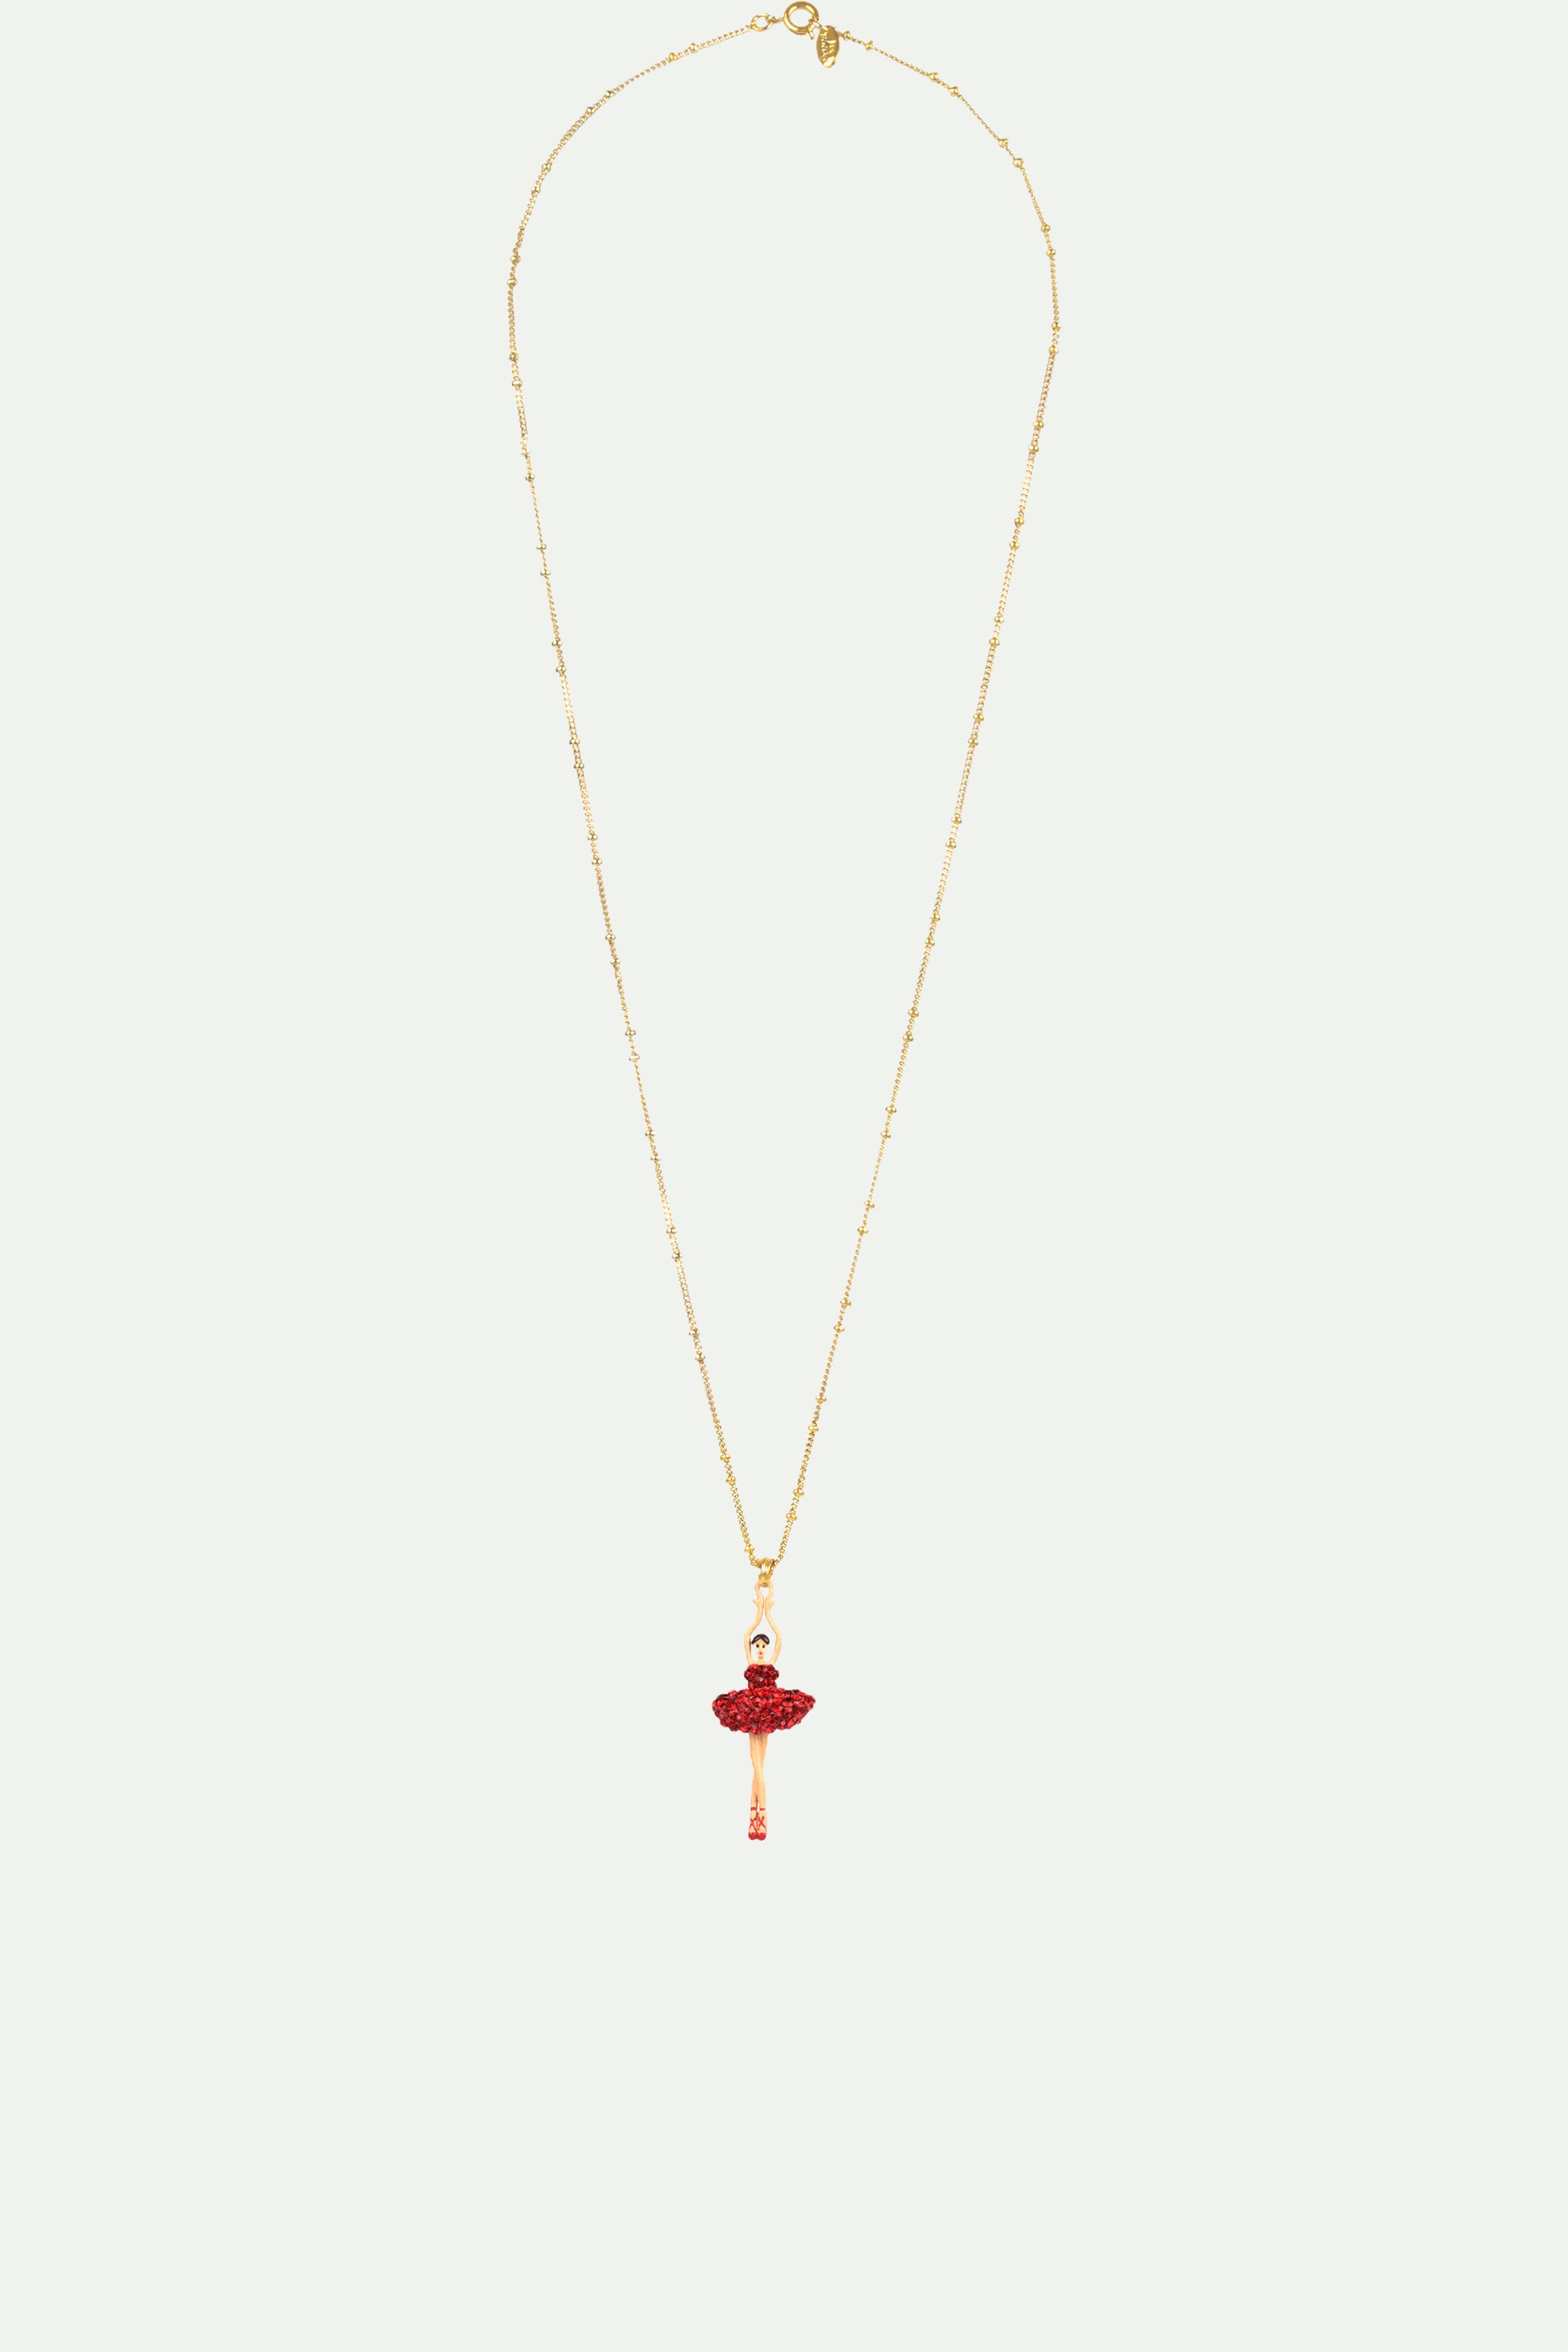 Necklace featuring ballerina with tutu paved with red rhinestone